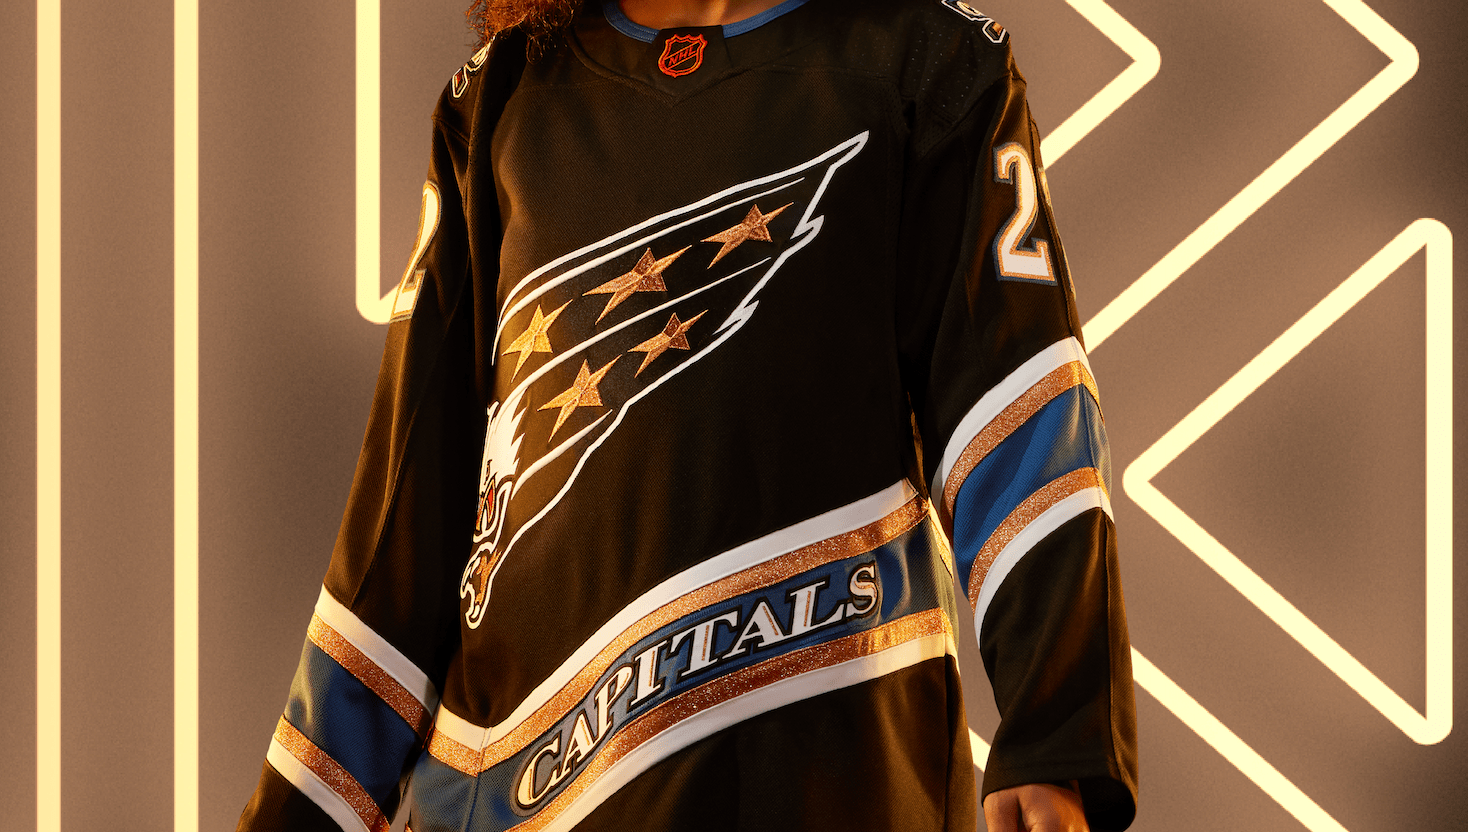 This is one of those classic ‘90s looks, with the big logo and the wide stripes crossing the edges. Everyone loves the “Screaming Eagle,” and now they can see it in Capital blue and metallic copper.